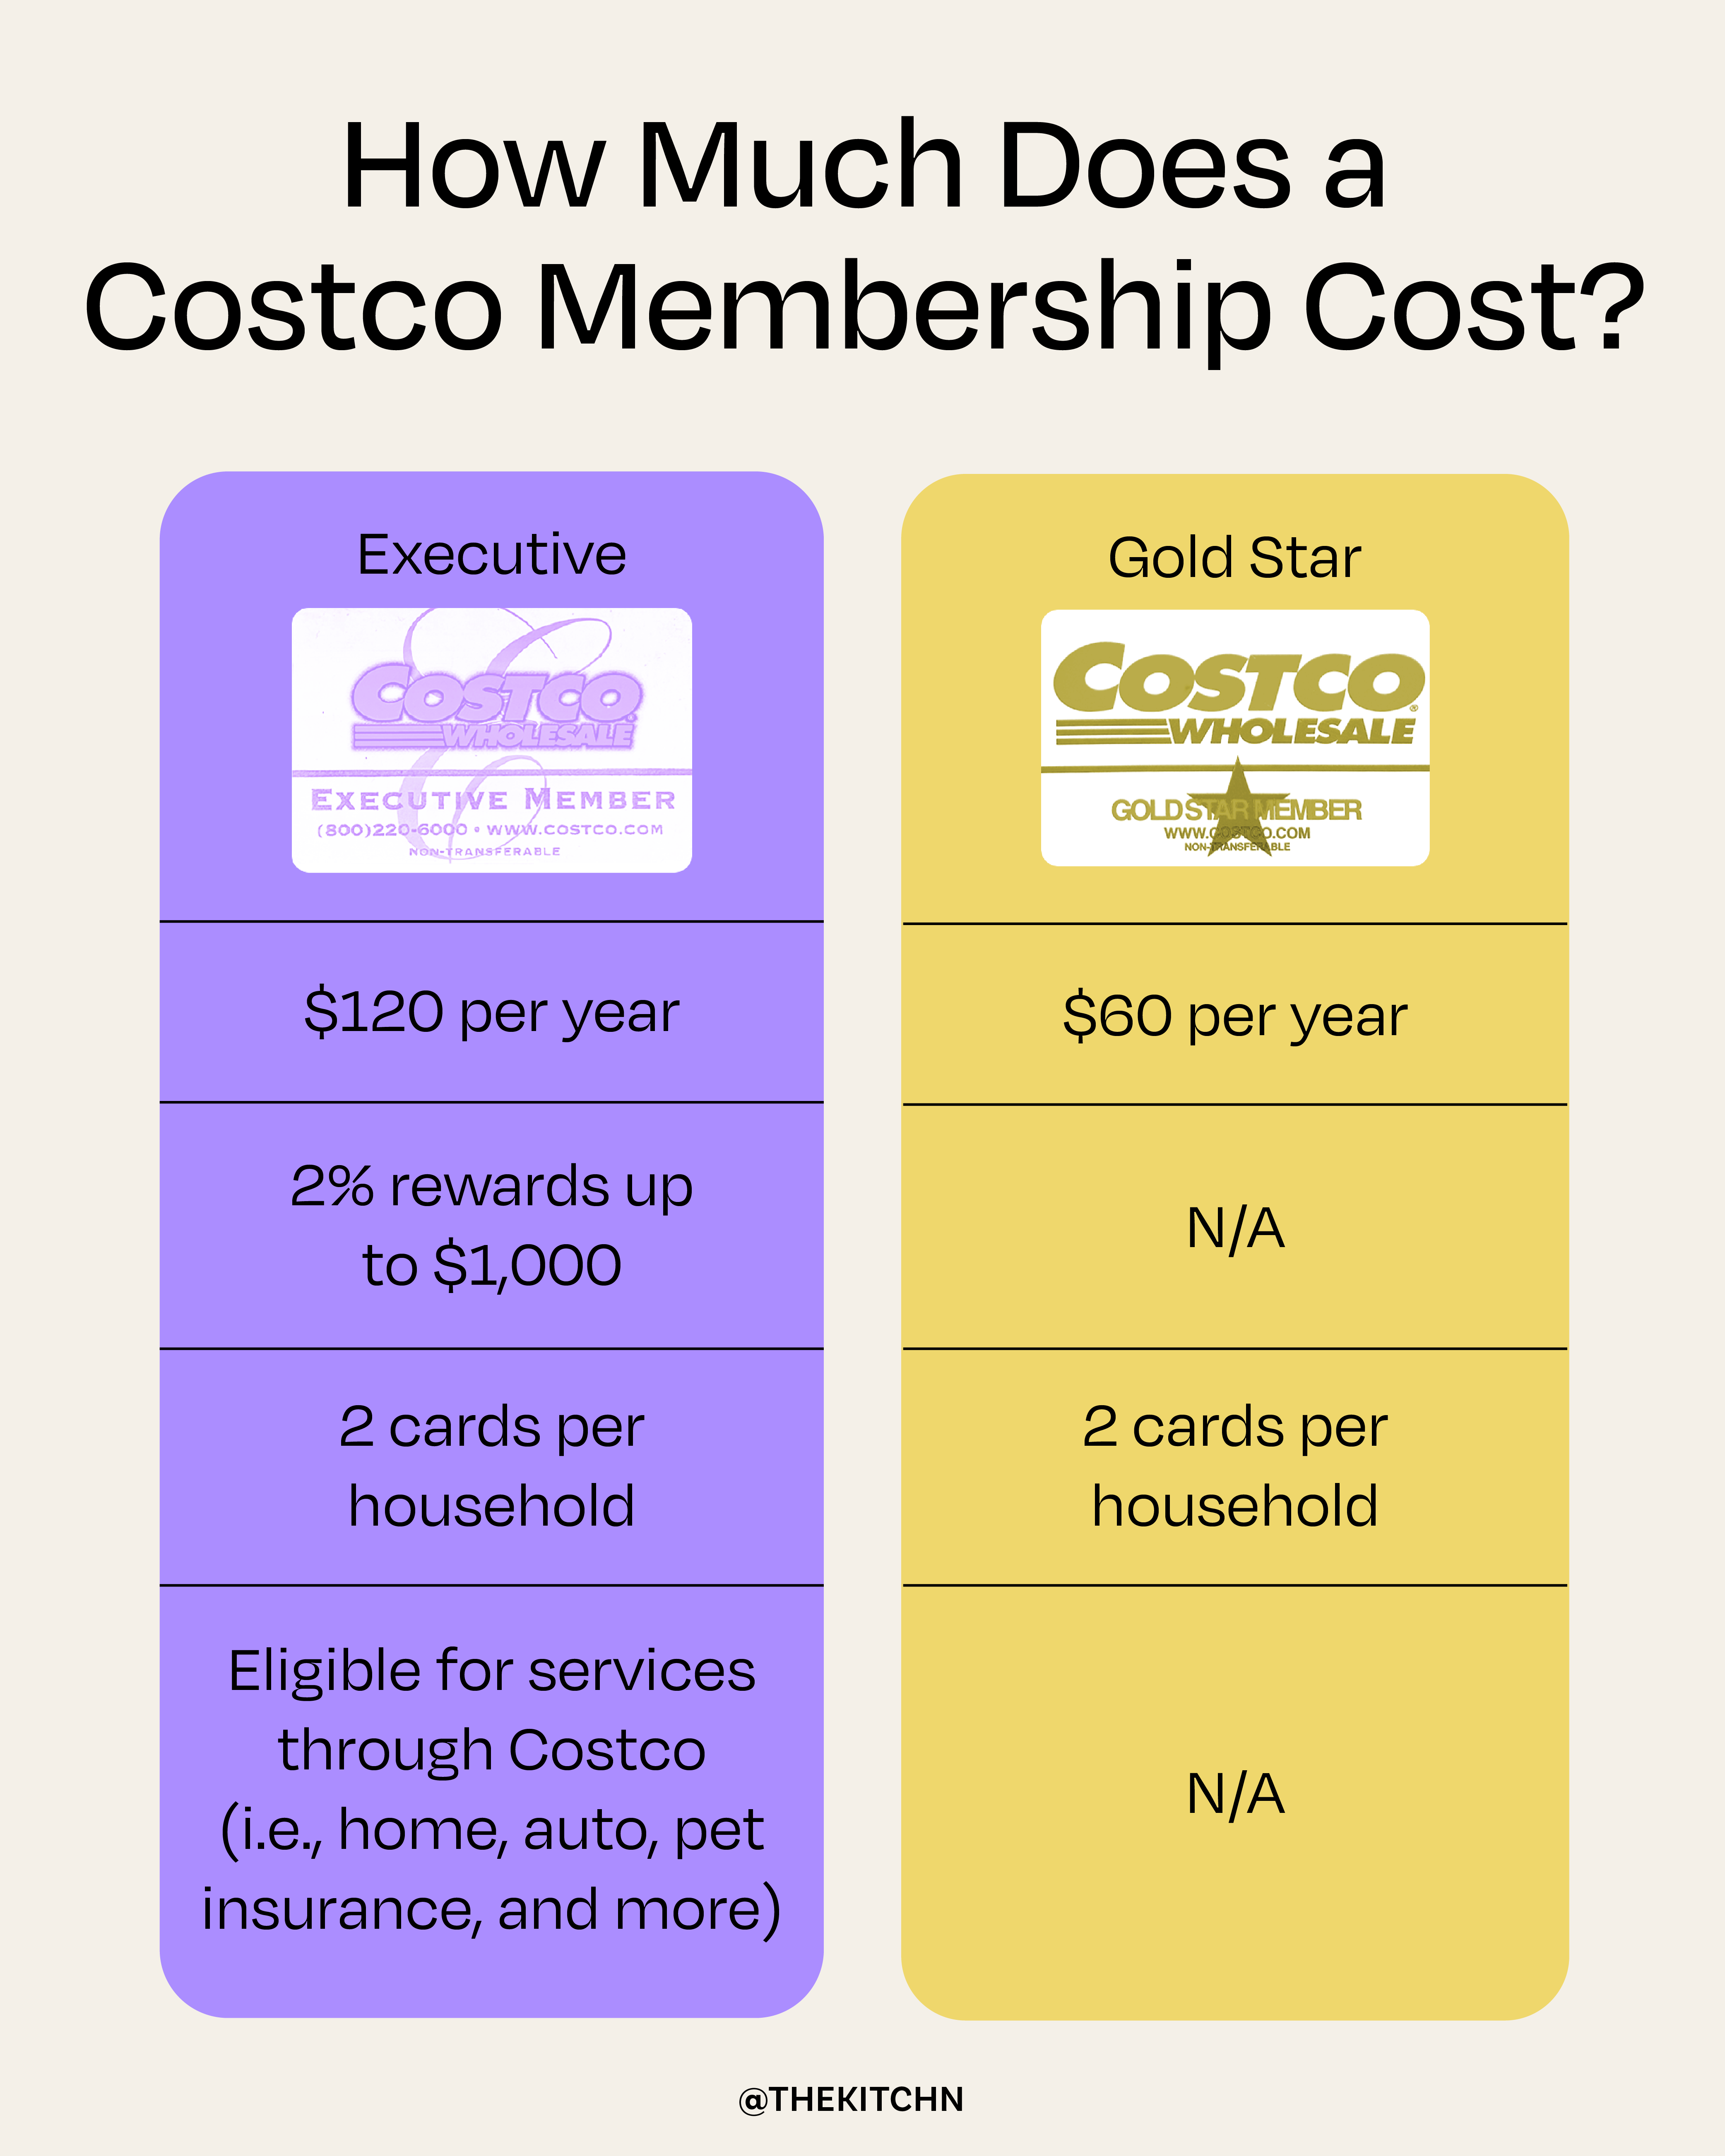 Is A Costco Membership Worth It? (Cost, Pros & Cons)